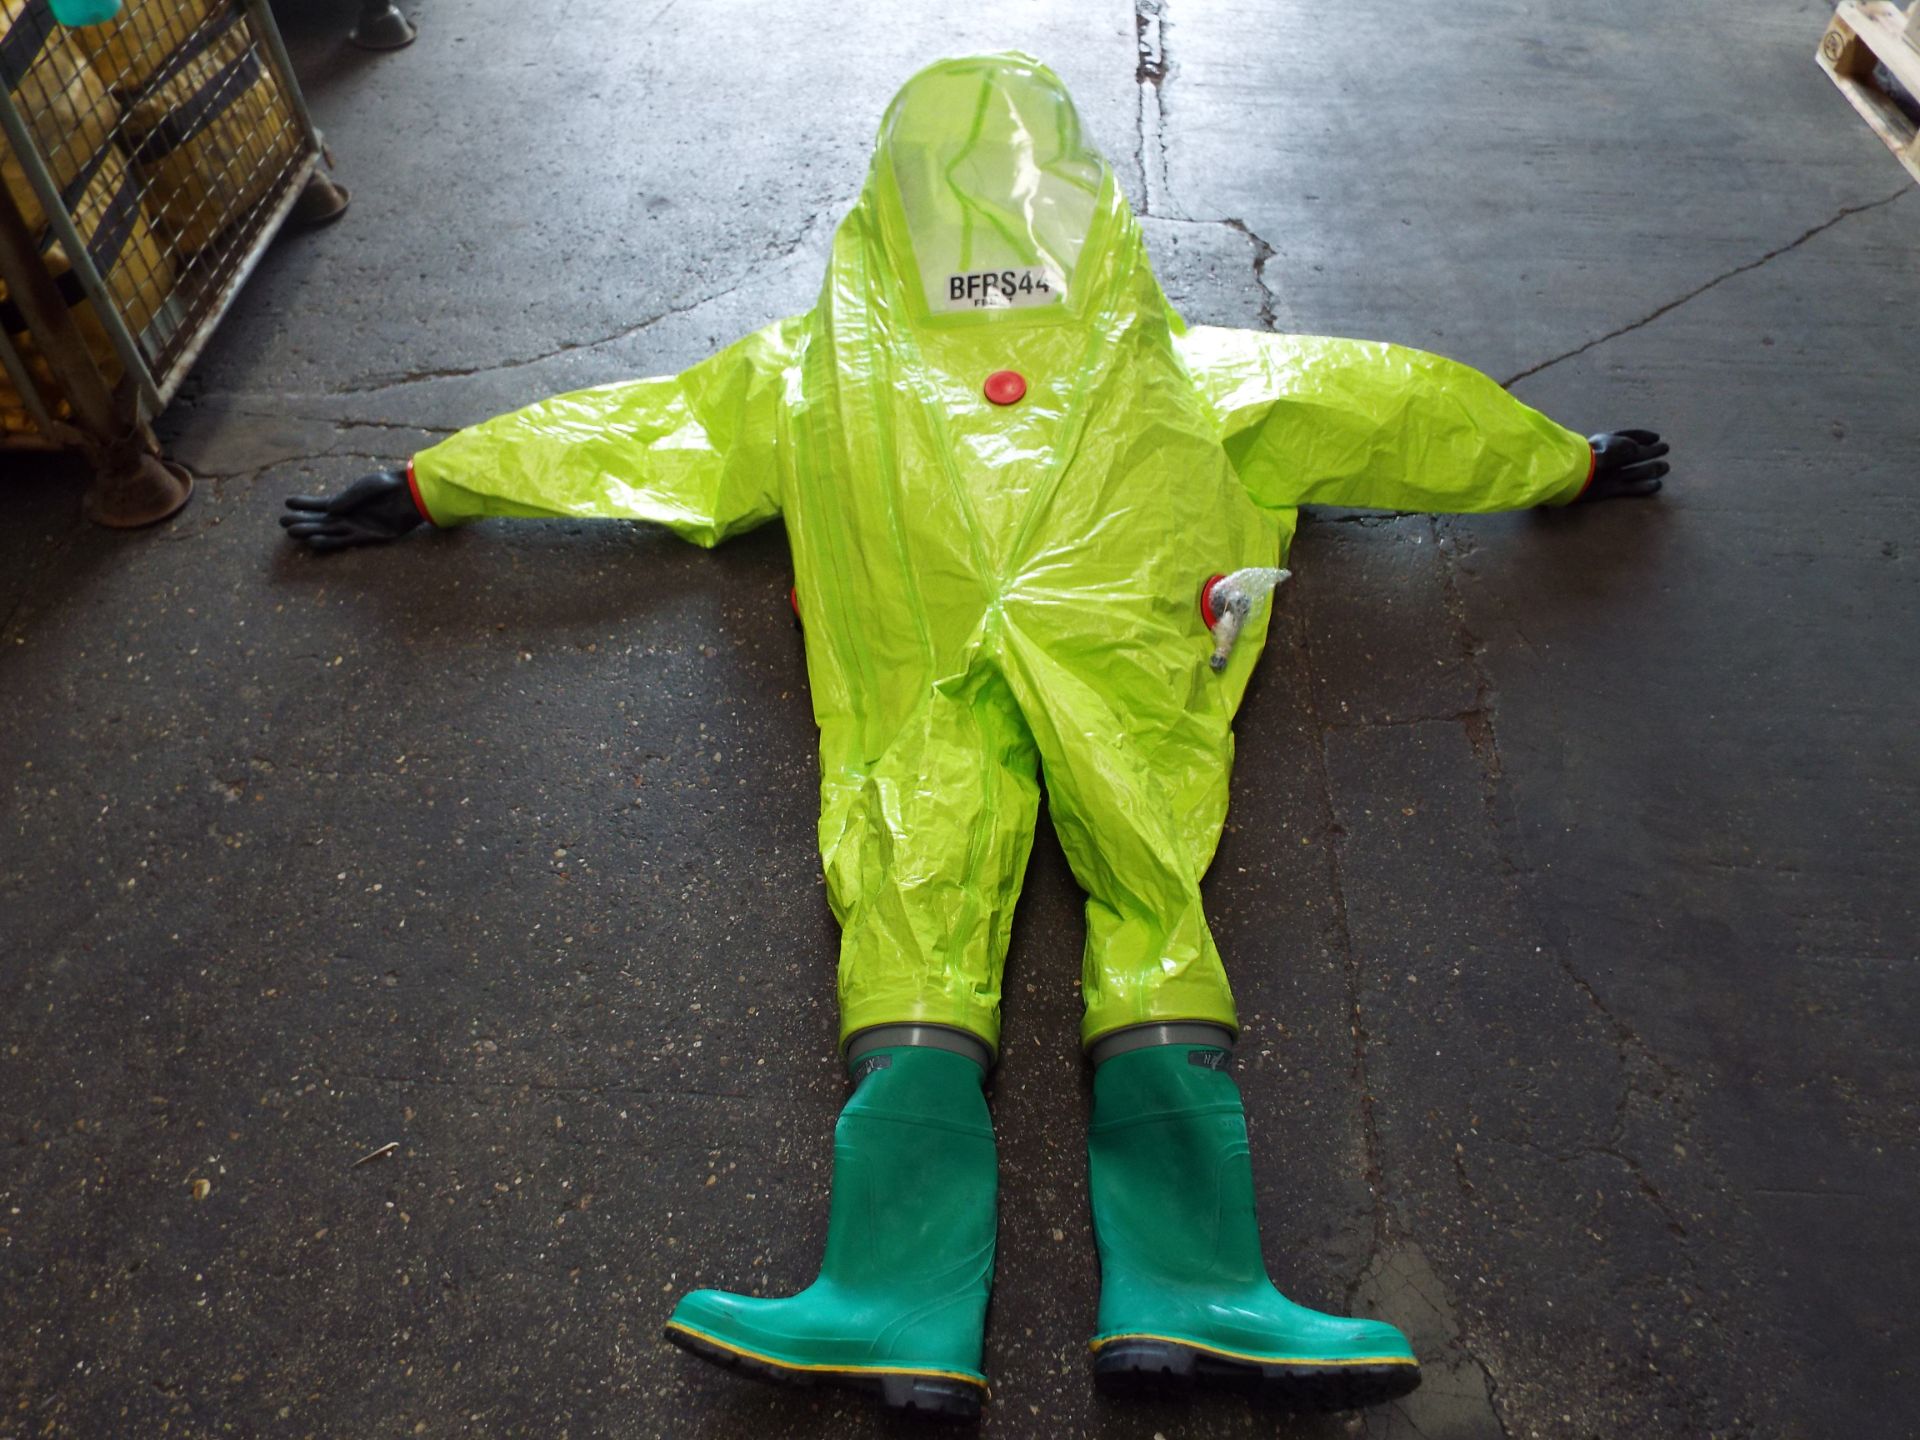 Respirex Tychem TK Gas-Tight Hazmat Suit Type 1A with Attached Boots and Gloves - Image 4 of 14